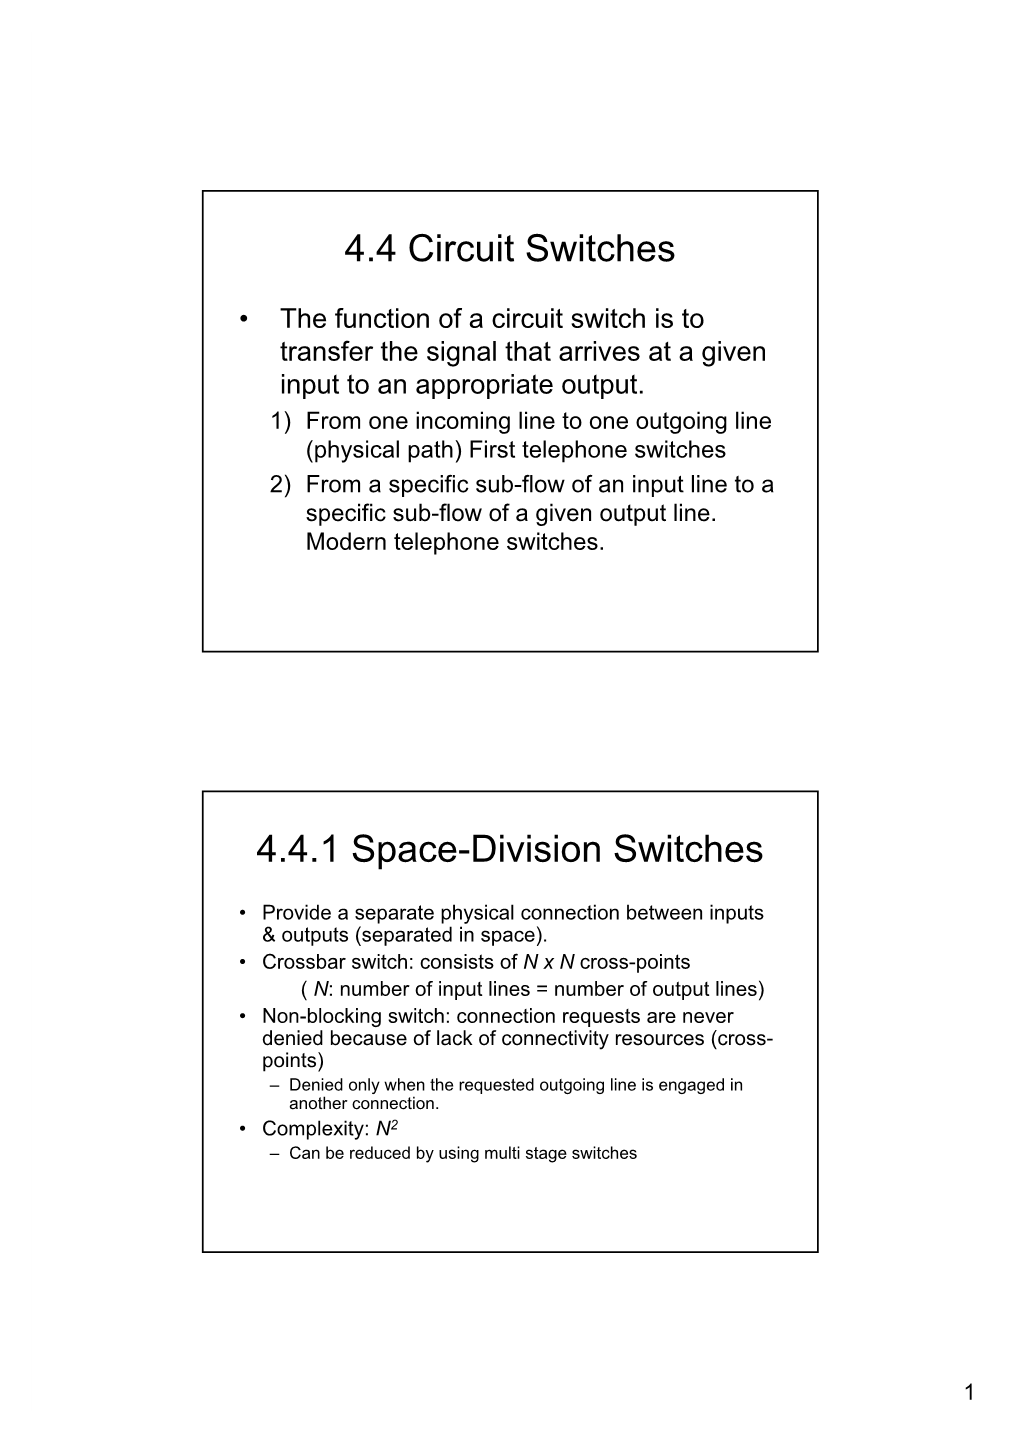 4.4 Circuit Switches 4.4.1 Space-Division Switches